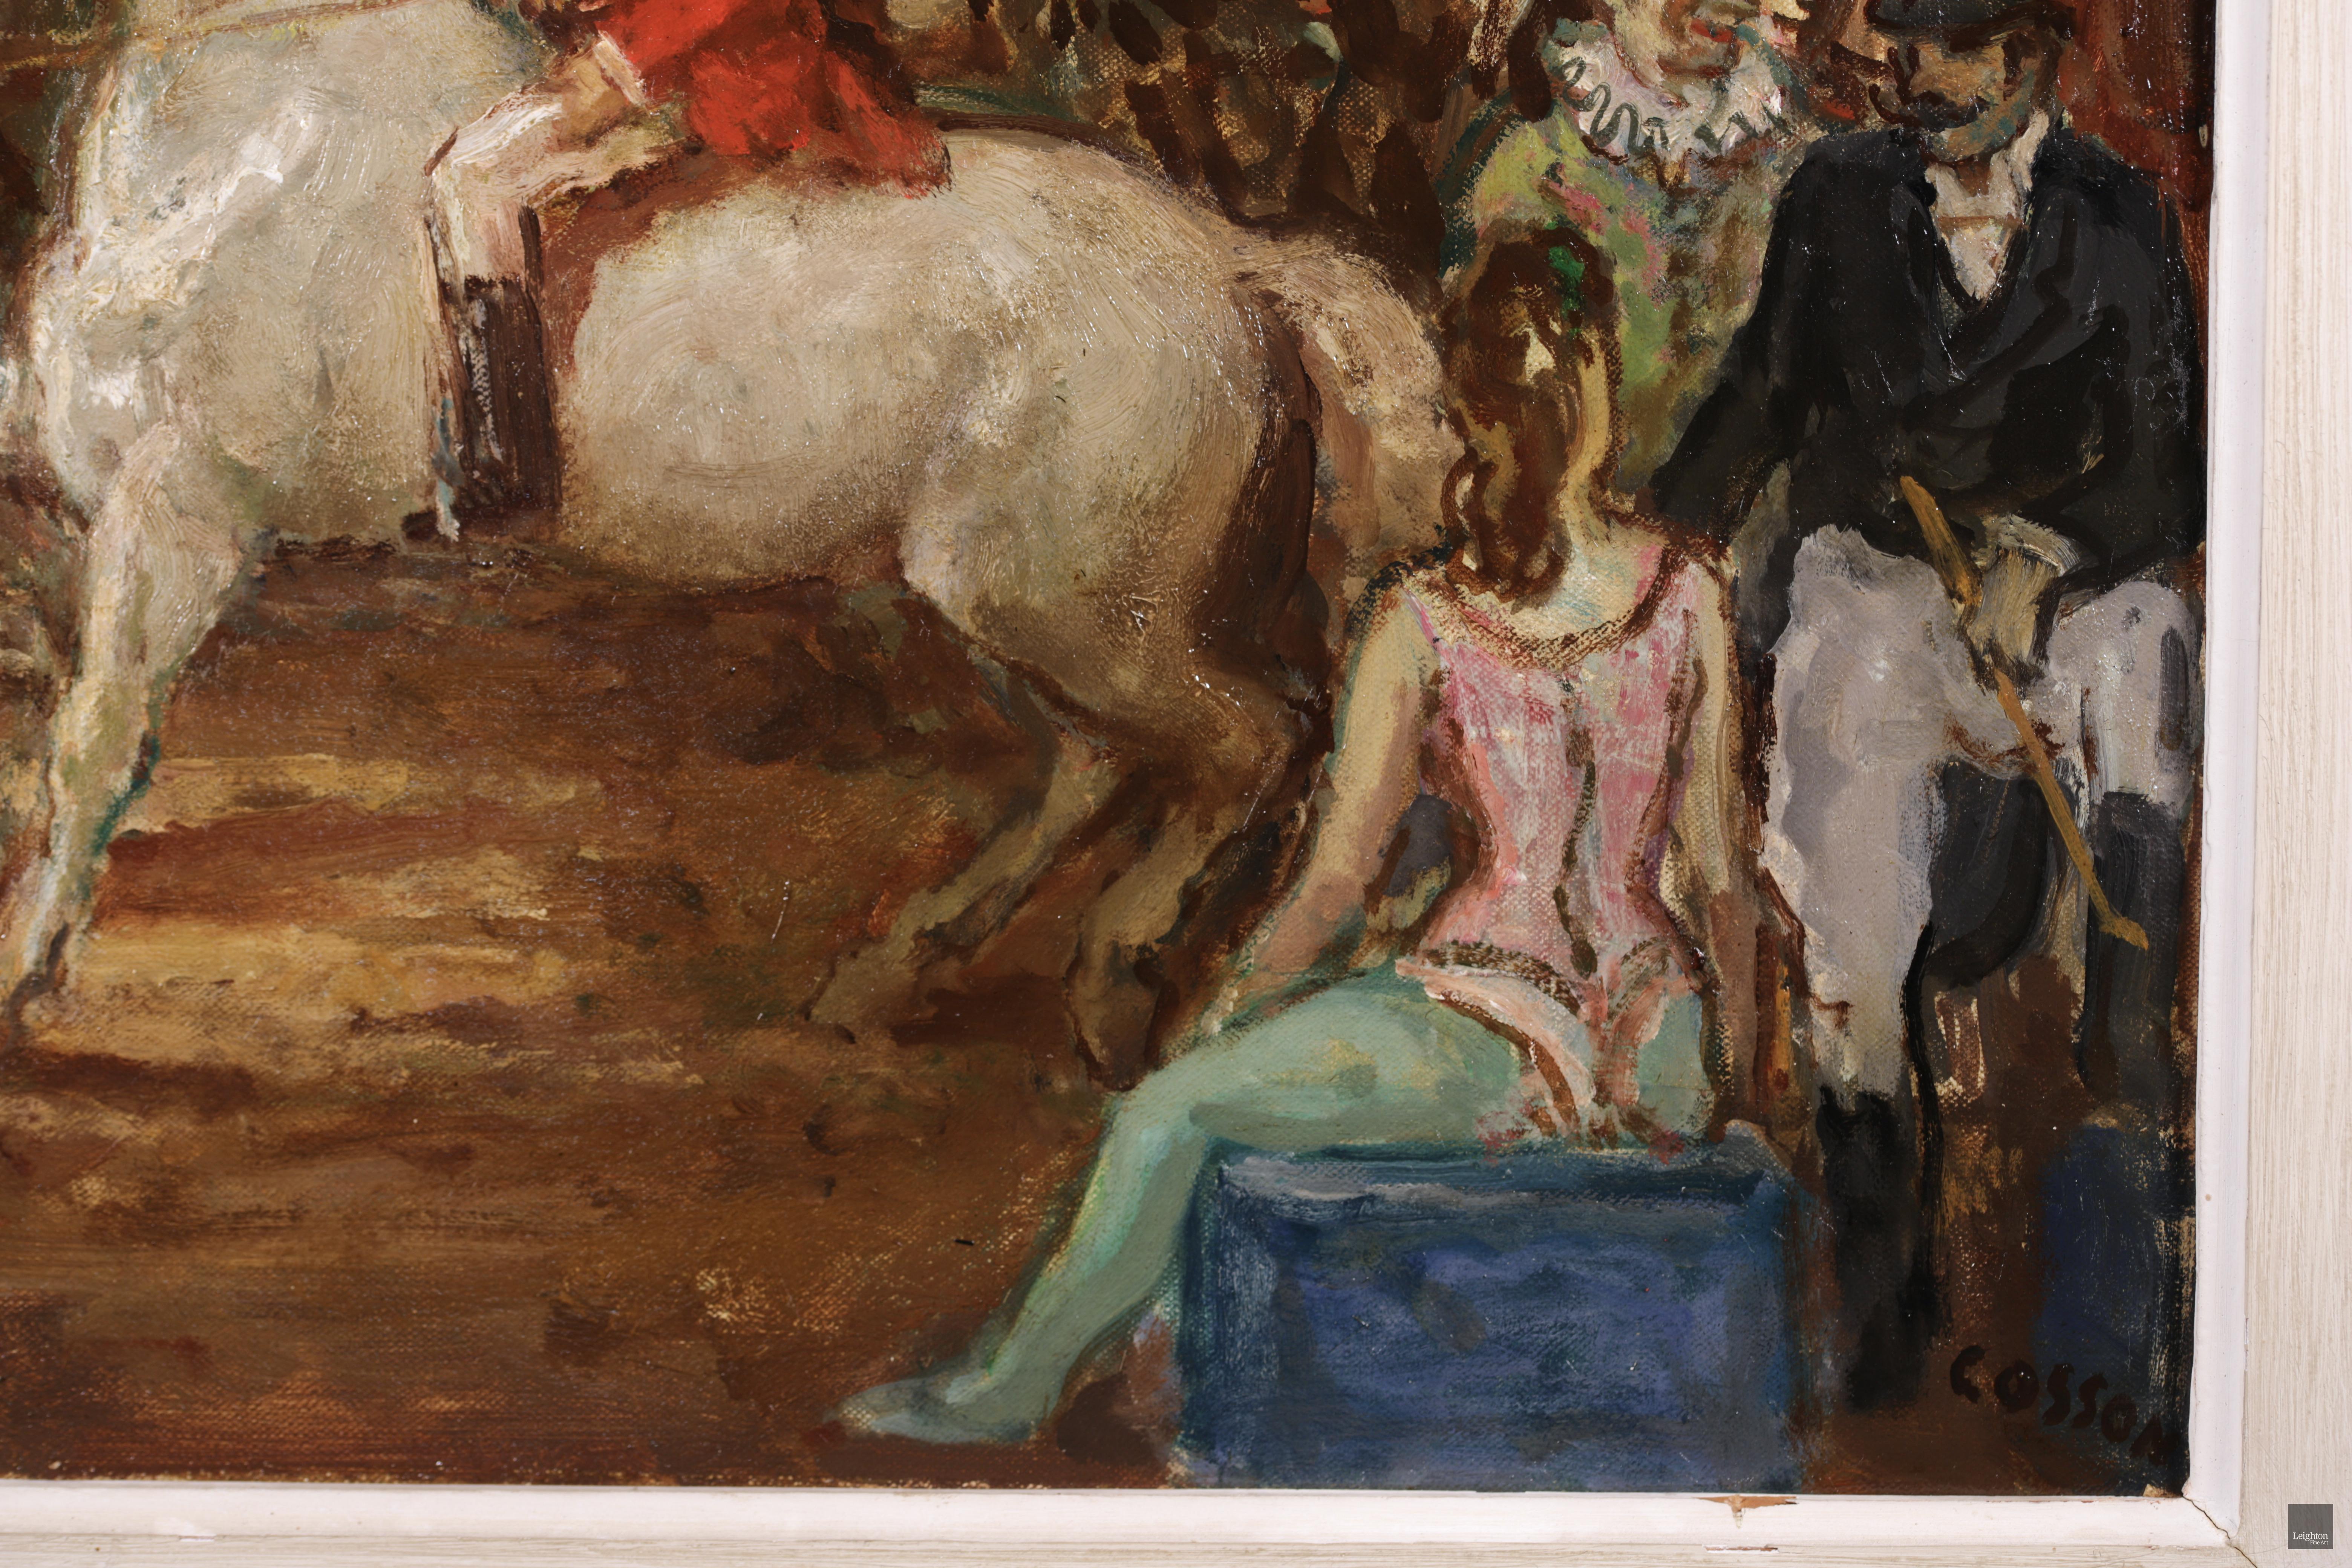 Au Cirque - Post Impressionist Oil, Figures & Horse at Circus by Marcel Cosson - Brown Figurative Painting by Jean-Louis-Marcel Cosson